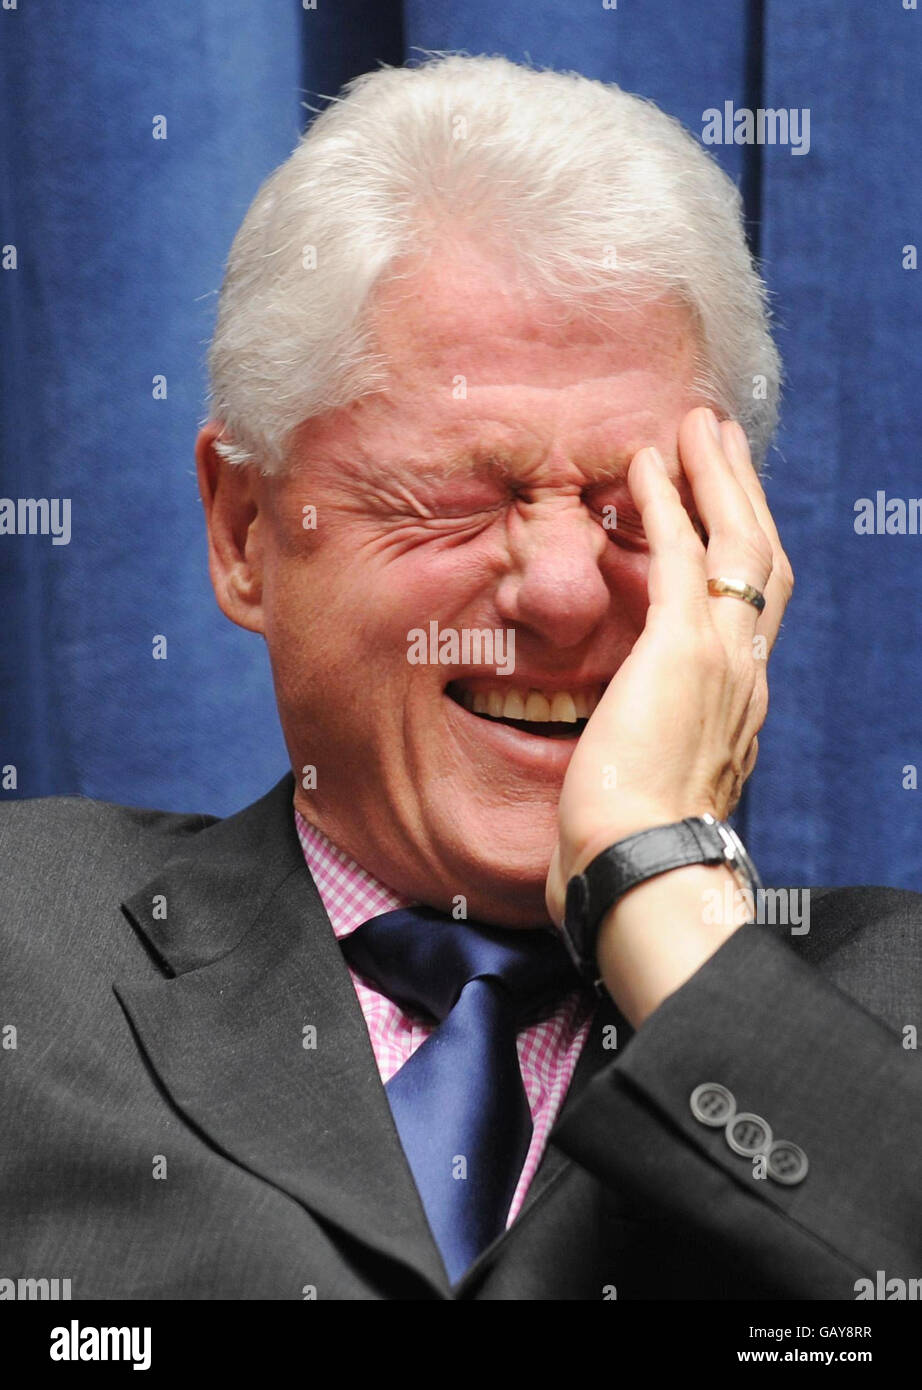 President Bill Clinton laughs at a joke made by Sir Bob Geldof at the Department for International Development in London today where he announced a new partnership to end rural poverty in Rwanda and Malawi. Stock Photo